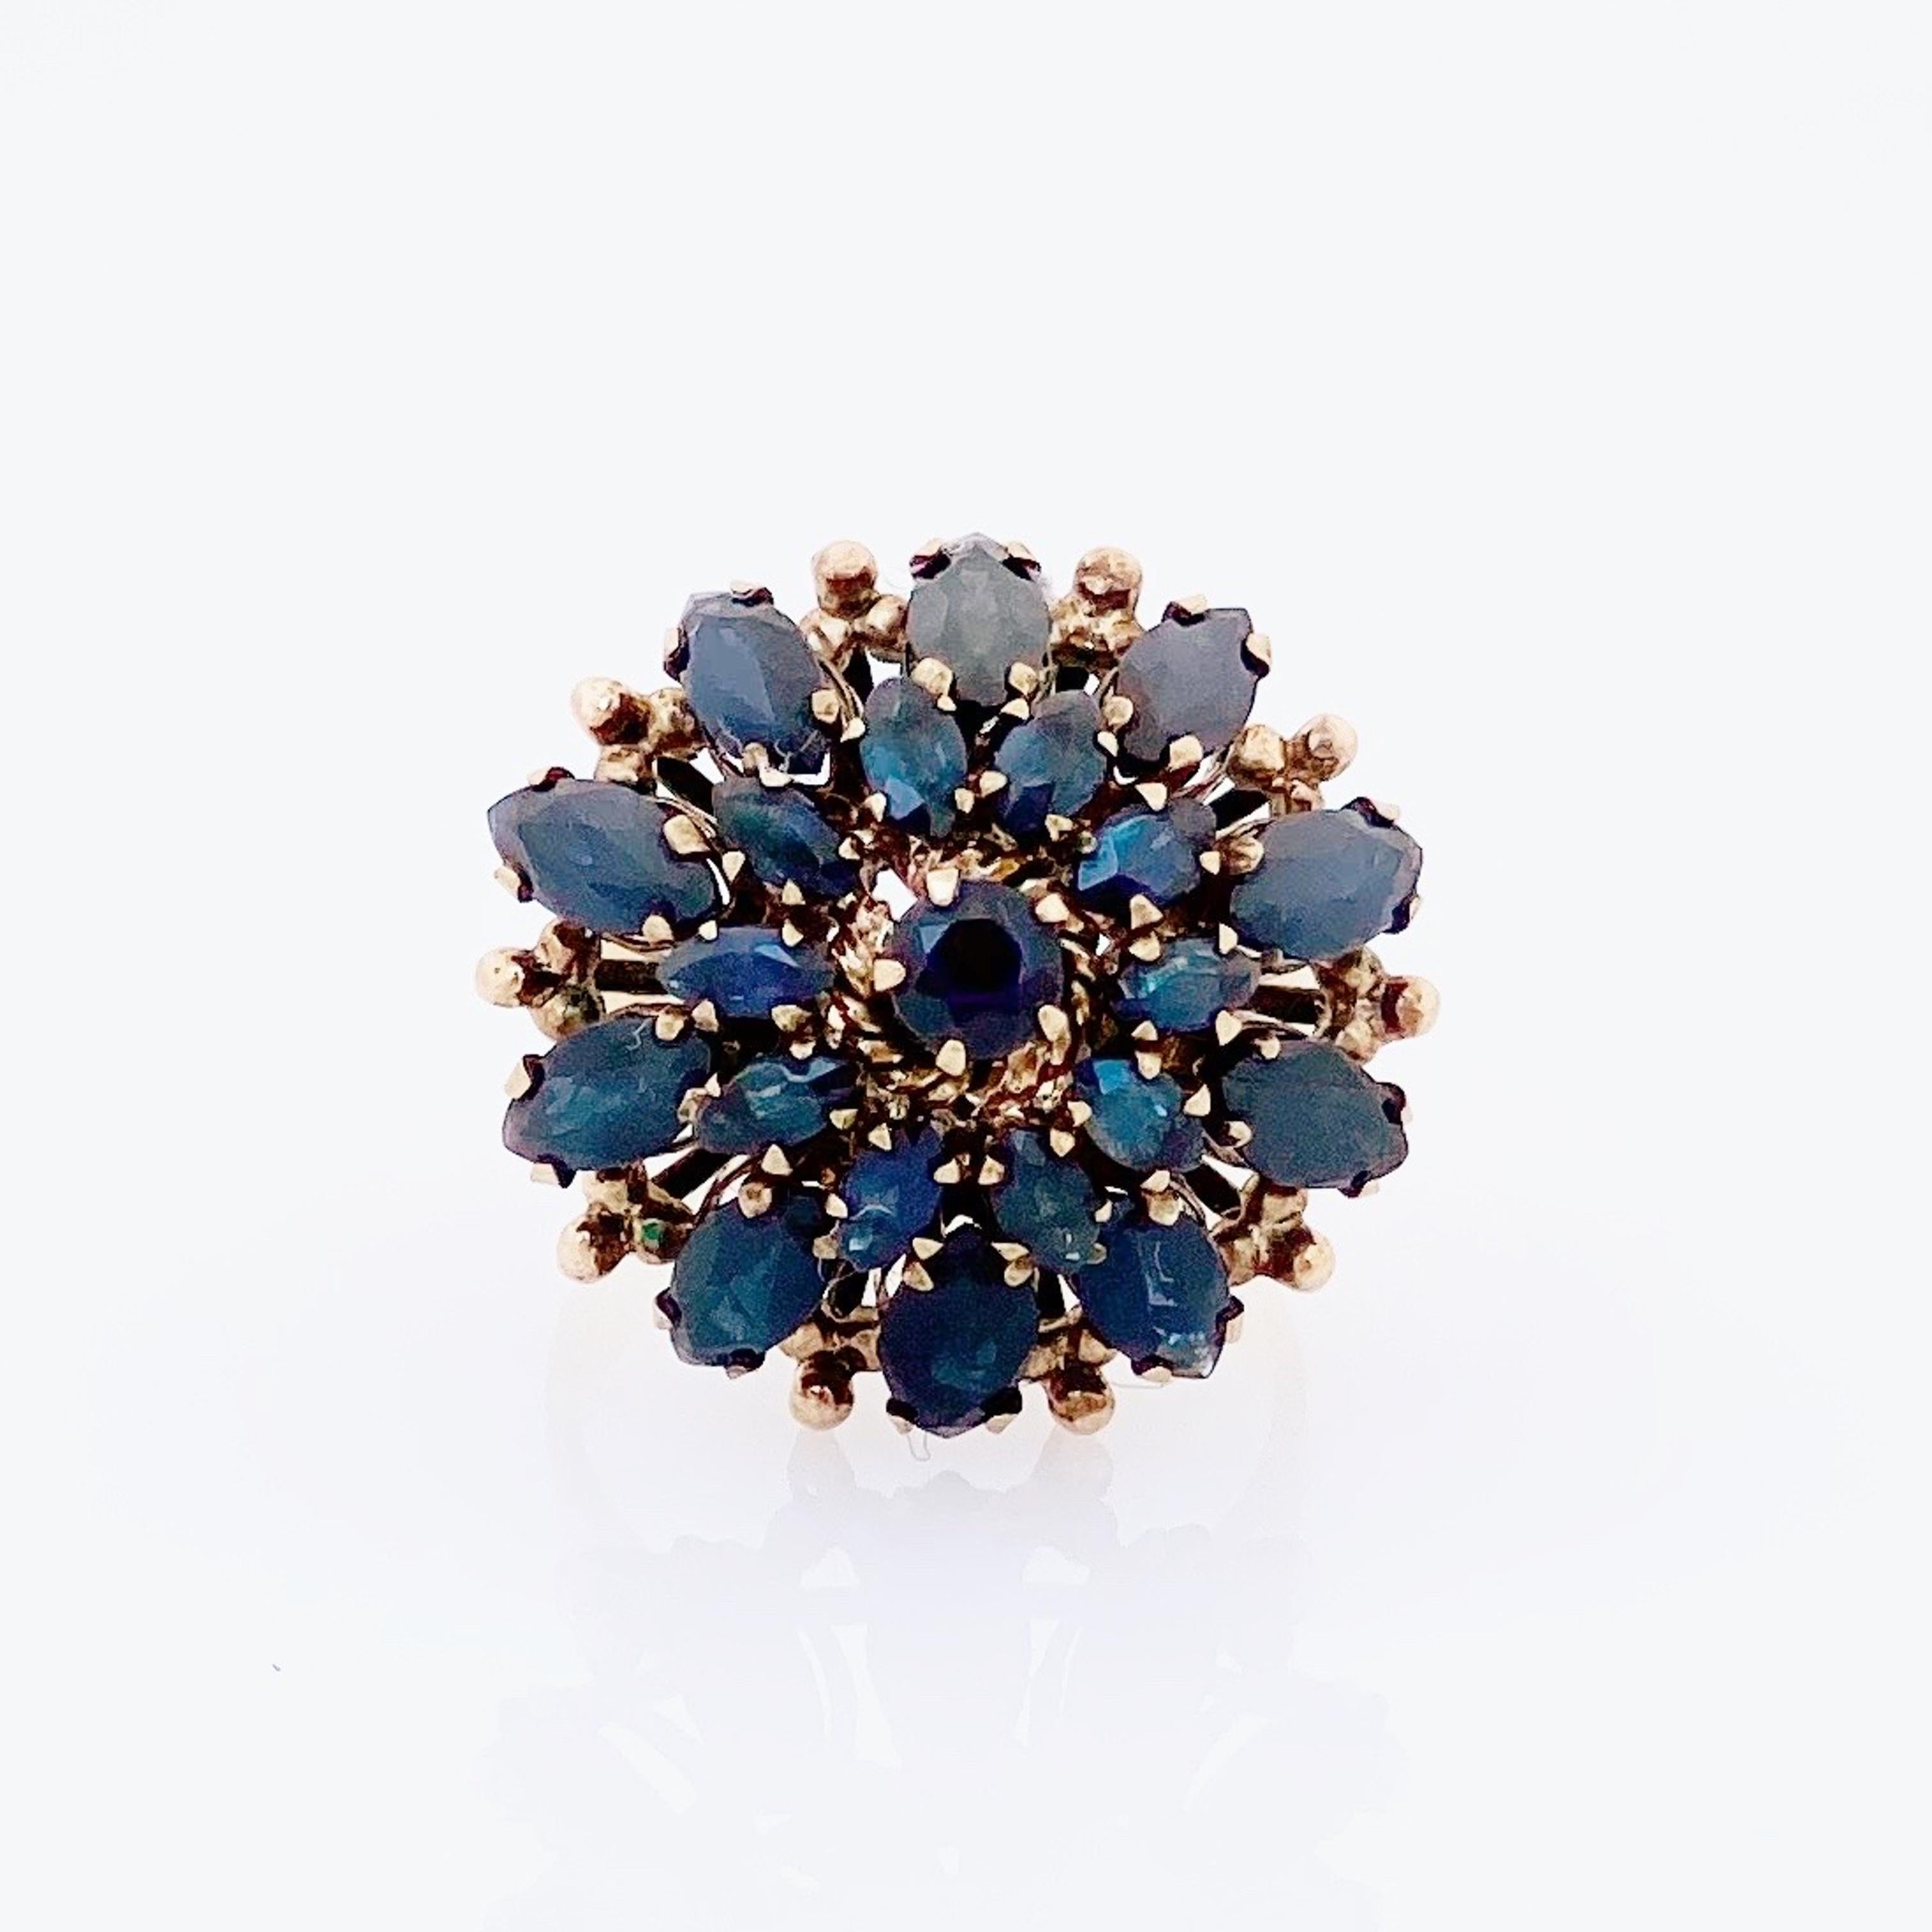 - Vintage item

- Size 5

- 18k gold (stamped on interior)

- Marquise and round cut faceted Sapphire gemstones

- Circa 1960s

- Estate acquired

- Excellent vintage condition 